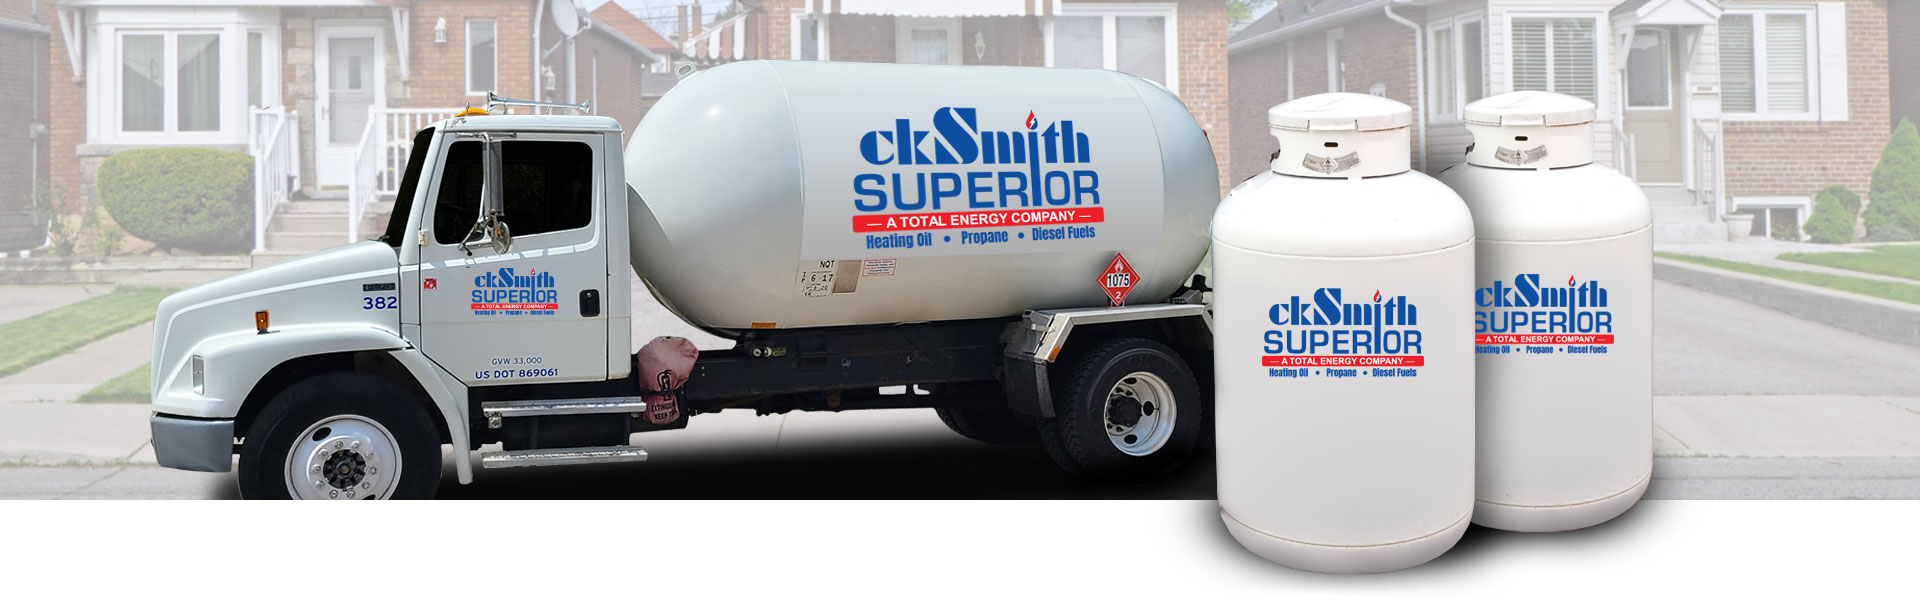 ckSmithSuperior delivering propane to a homeowner in Central MA